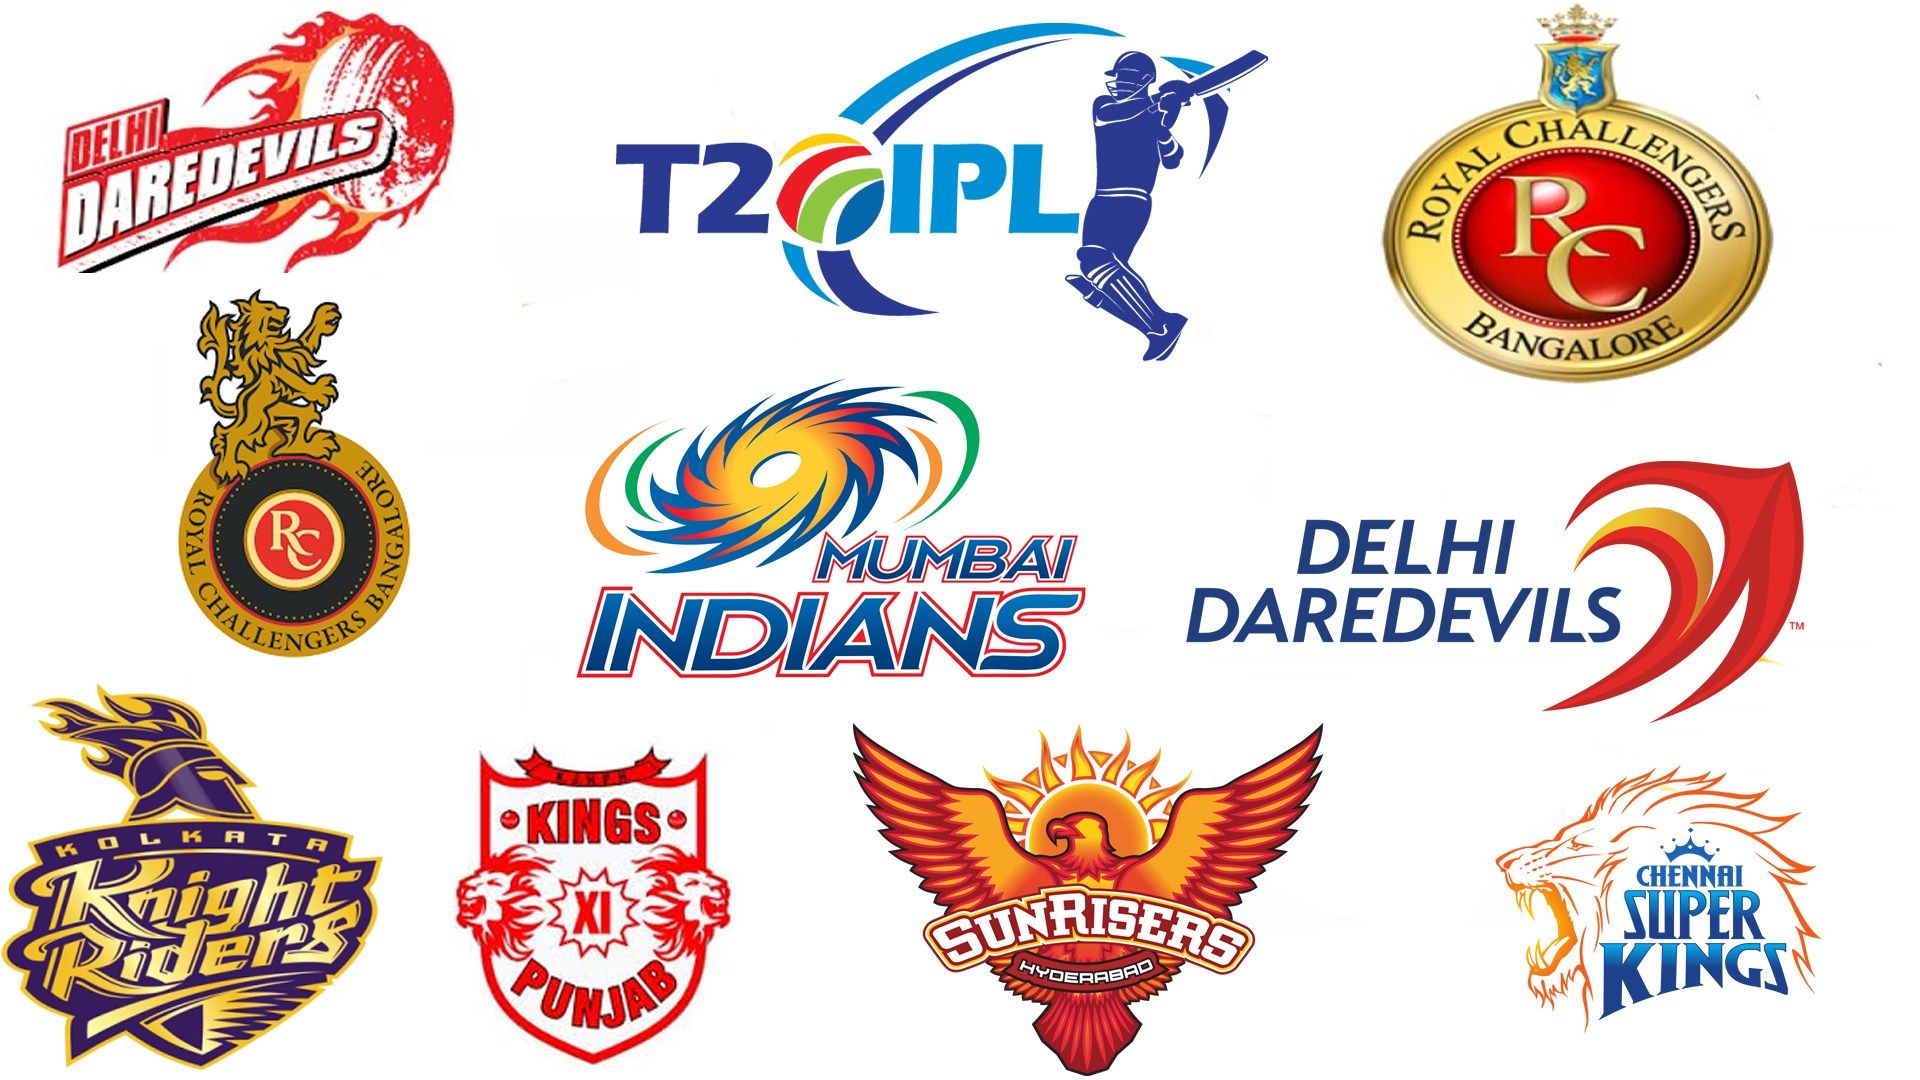 Watch IPL 2018 cricket matches for free on your smartphone using Airtel TV app